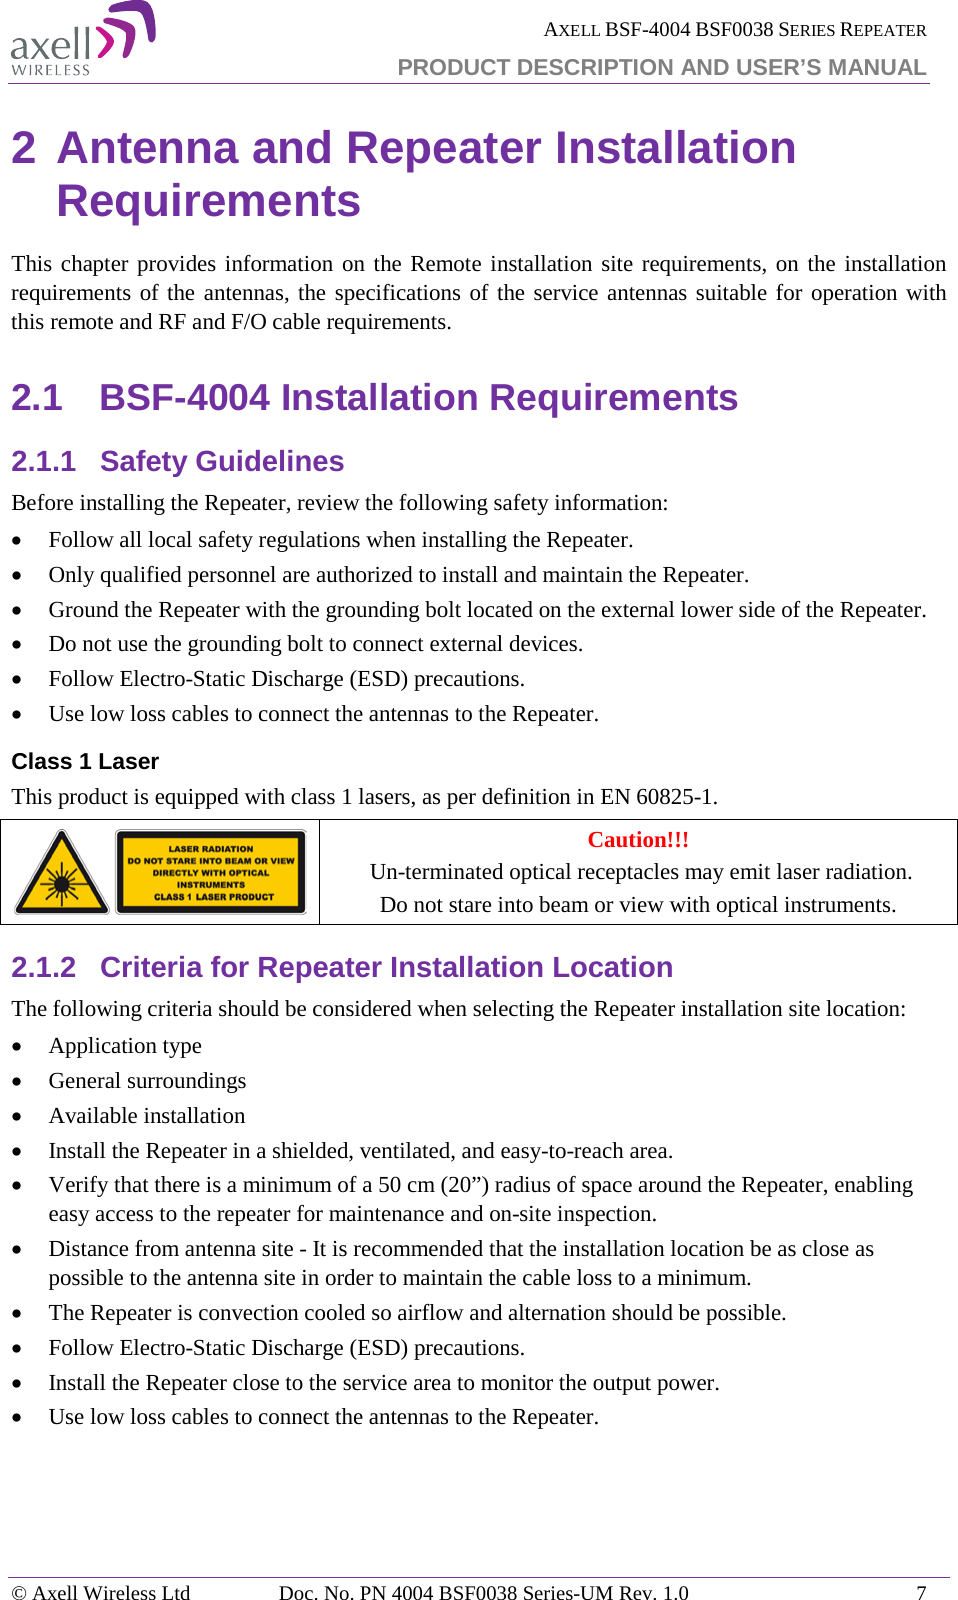  AXELL BSF-4004 BSF0038 SERIES REPEATER PRODUCT DESCRIPTION AND USER’S MANUAL  2 Antenna and Repeater Installation Requirements This chapter provides information on the Remote installation site requirements, on the installation requirements of the antennas, the specifications of the service antennas suitable for operation with this remote and RF and F/O cable requirements. 2.1 BSF-4004 Installation Requirements 2.1.1 Safety Guidelines Before installing the Repeater, review the following safety information:  • Follow all local safety regulations when installing the Repeater. • Only qualified personnel are authorized to install and maintain the Repeater. • Ground the Repeater with the grounding bolt located on the external lower side of the Repeater. • Do not use the grounding bolt to connect external devices. • Follow Electro-Static Discharge (ESD) precautions. • Use low loss cables to connect the antennas to the Repeater. Class 1 Laser This product is equipped with class 1 lasers, as per definition in EN 60825-1.   Caution!!!  Un-terminated optical receptacles may emit laser radiation.  Do not stare into beam or view with optical instruments. 2.1.2 Criteria for Repeater Installation Location The following criteria should be considered when selecting the Repeater installation site location: • Application type • General surroundings • Available installation • Install the Repeater in a shielded, ventilated, and easy-to-reach area. • Verify that there is a minimum of a 50 cm (20”) radius of space around the Repeater, enabling easy access to the repeater for maintenance and on-site inspection. • Distance from antenna site - It is recommended that the installation location be as close as possible to the antenna site in order to maintain the cable loss to a minimum. • The Repeater is convection cooled so airflow and alternation should be possible. • Follow Electro-Static Discharge (ESD) precautions. • Install the Repeater close to the service area to monitor the output power. • Use low loss cables to connect the antennas to the Repeater.   © Axell Wireless Ltd Doc. No. PN 4004 BSF0038 Series-UM Rev. 1.0  7 